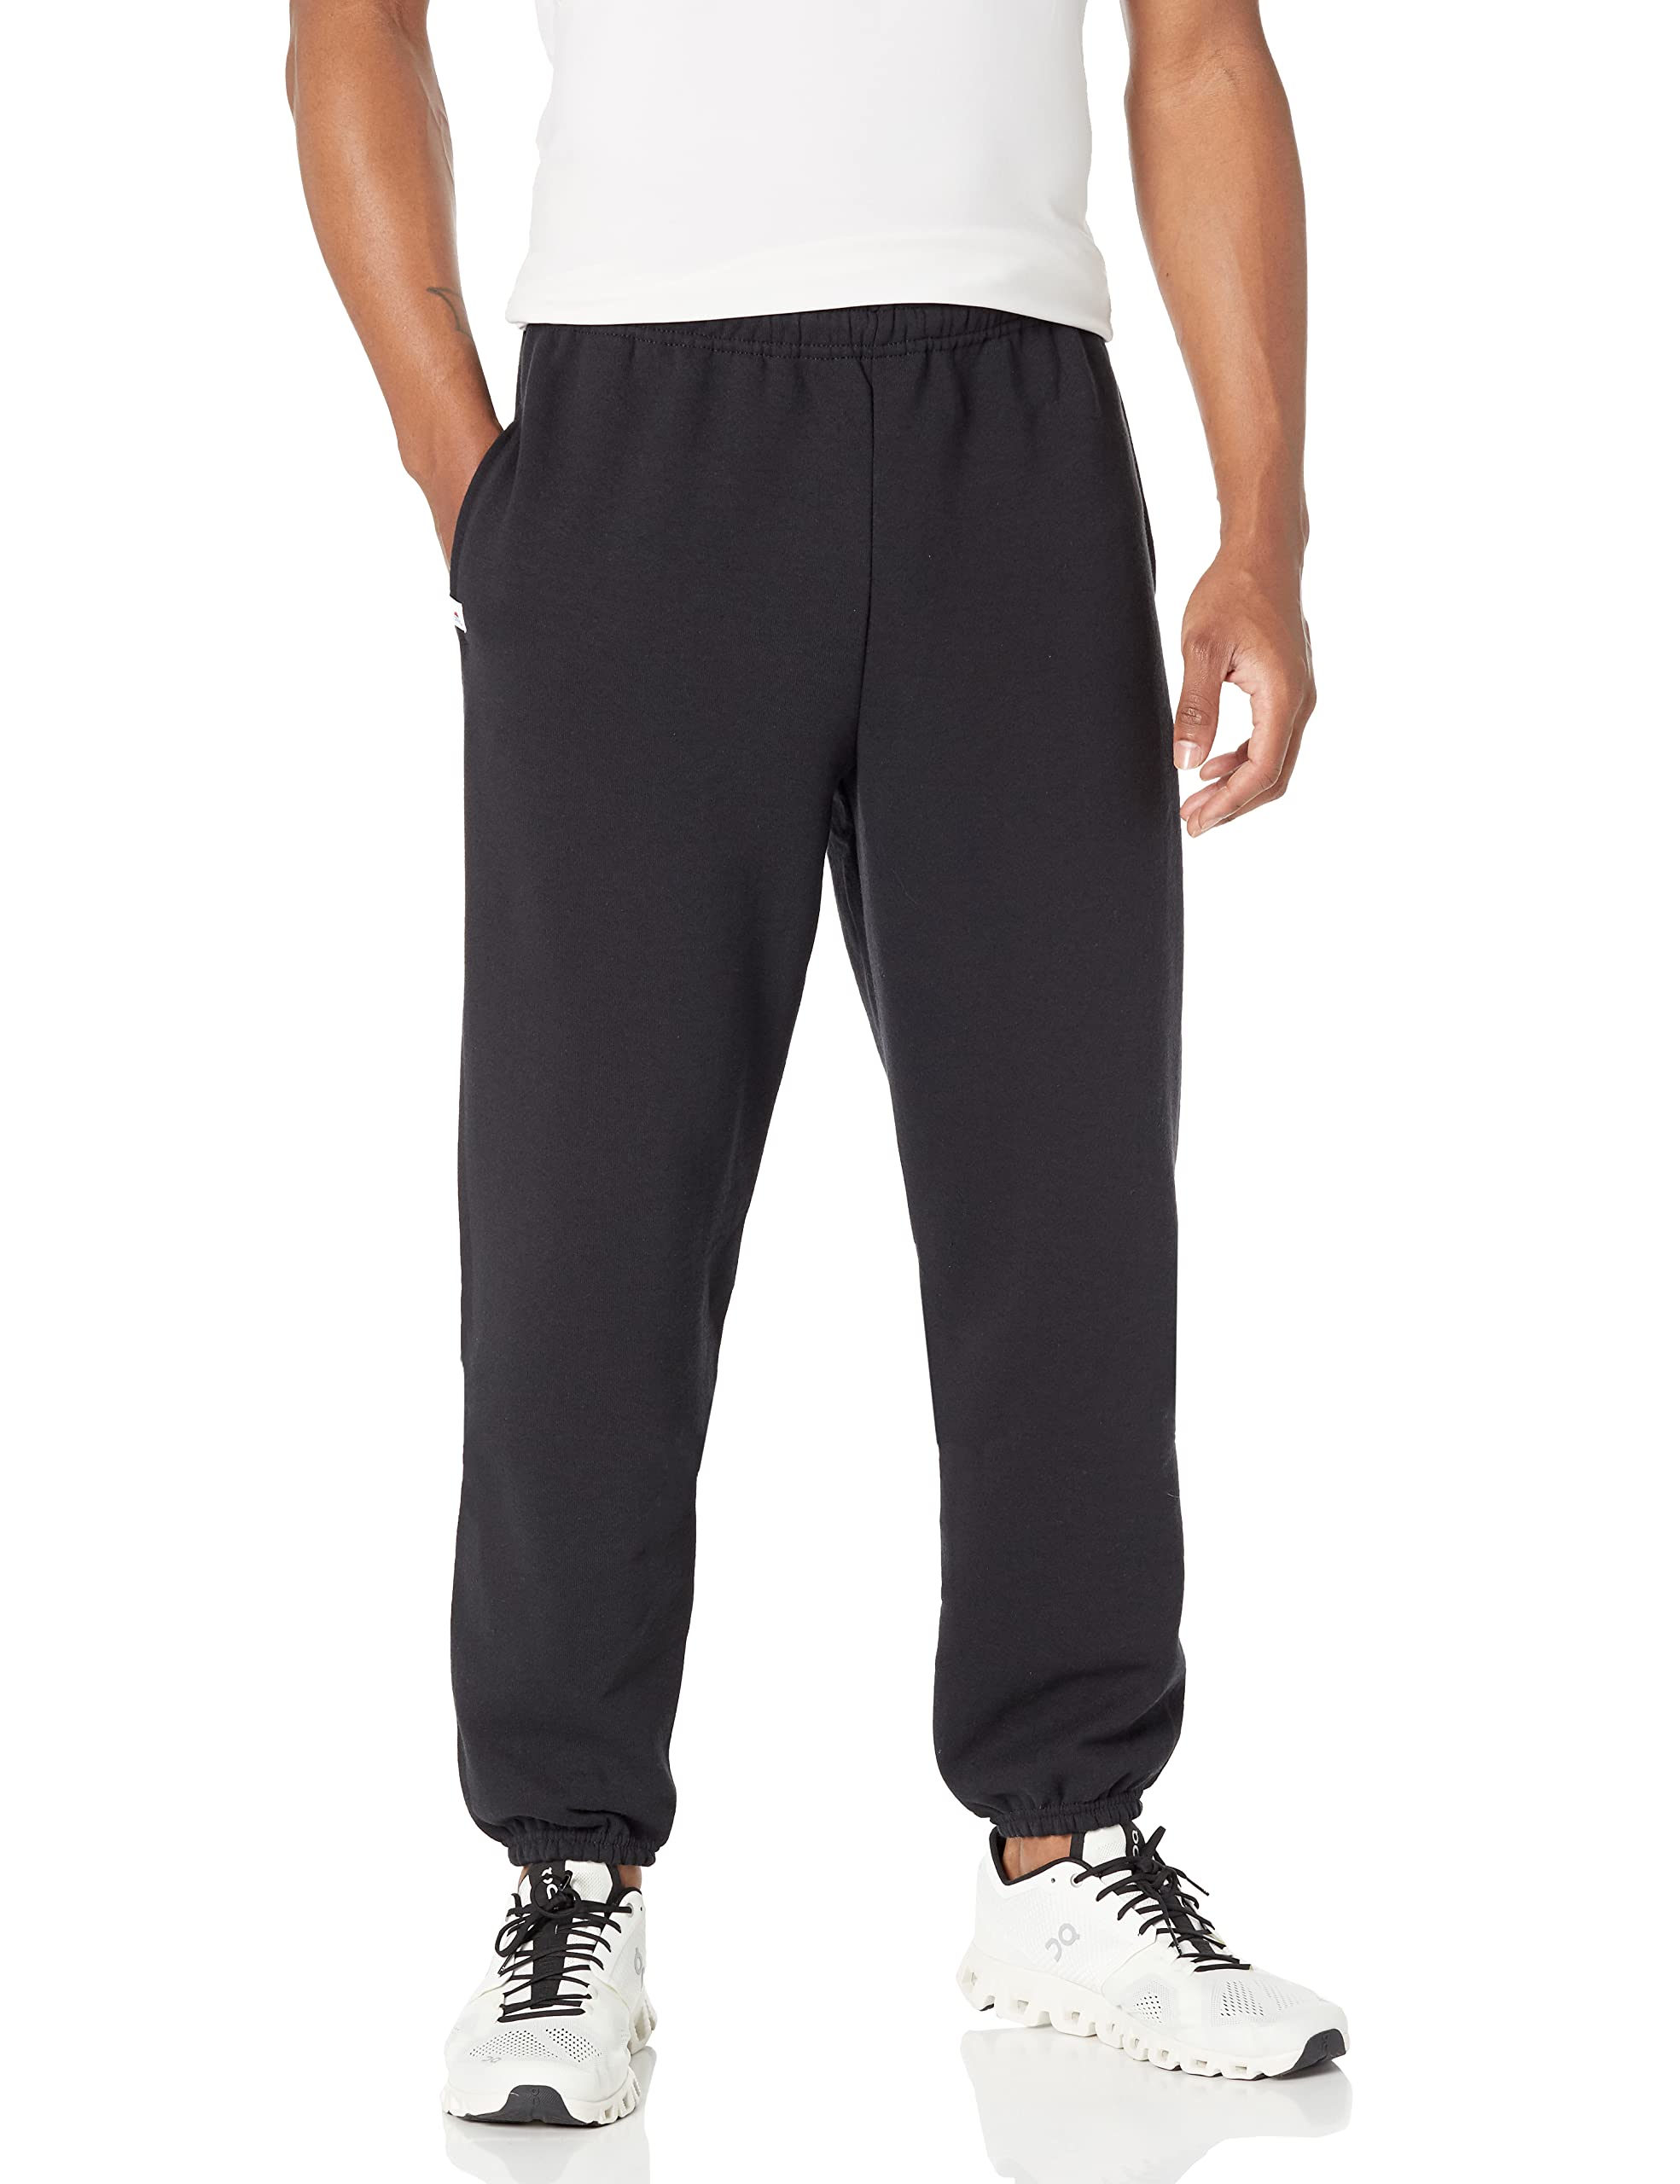 Russell Athletic Dri-Power Fleece Sweatpants & Joggers, Moisture Wicking, With or Without Pockets, Sizes S-4X